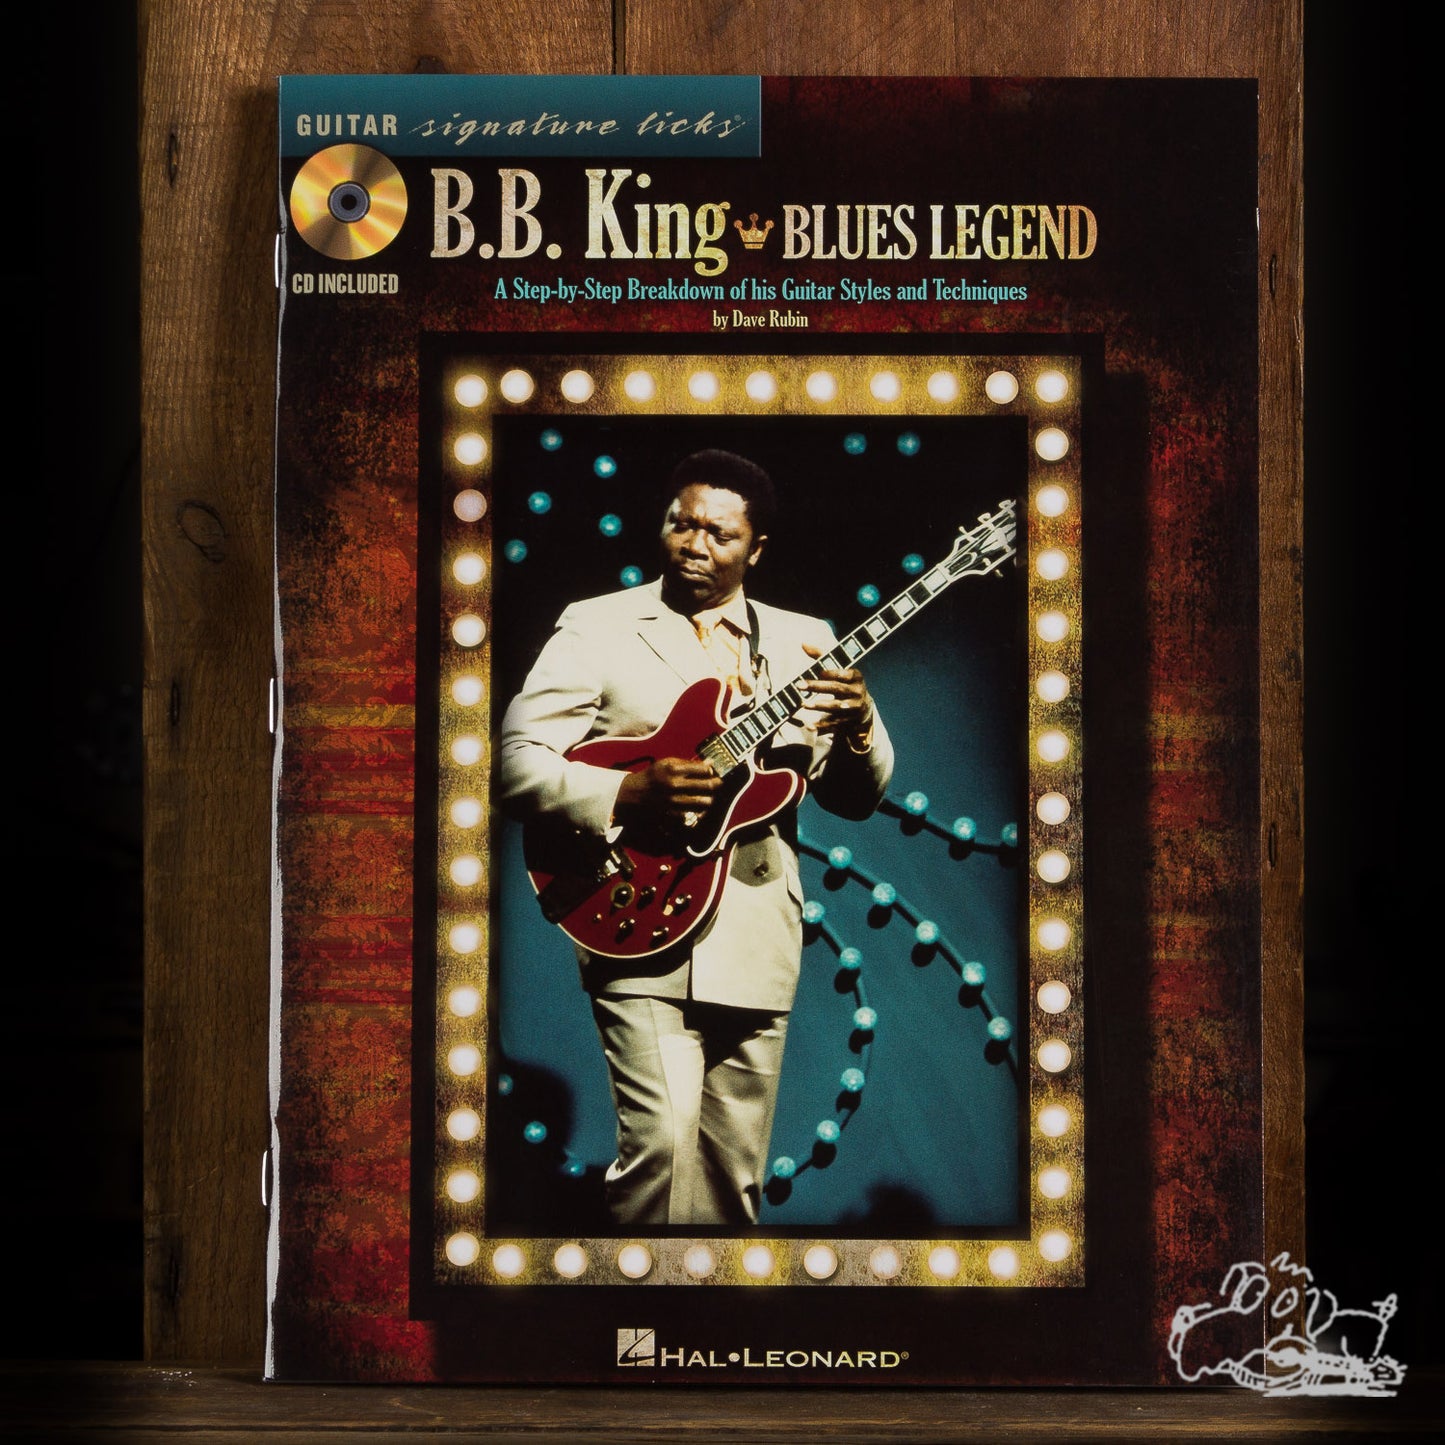 B.B. King Blues Legend: A Step-by-Step Breakdown of His Guitar Styles and Techniques